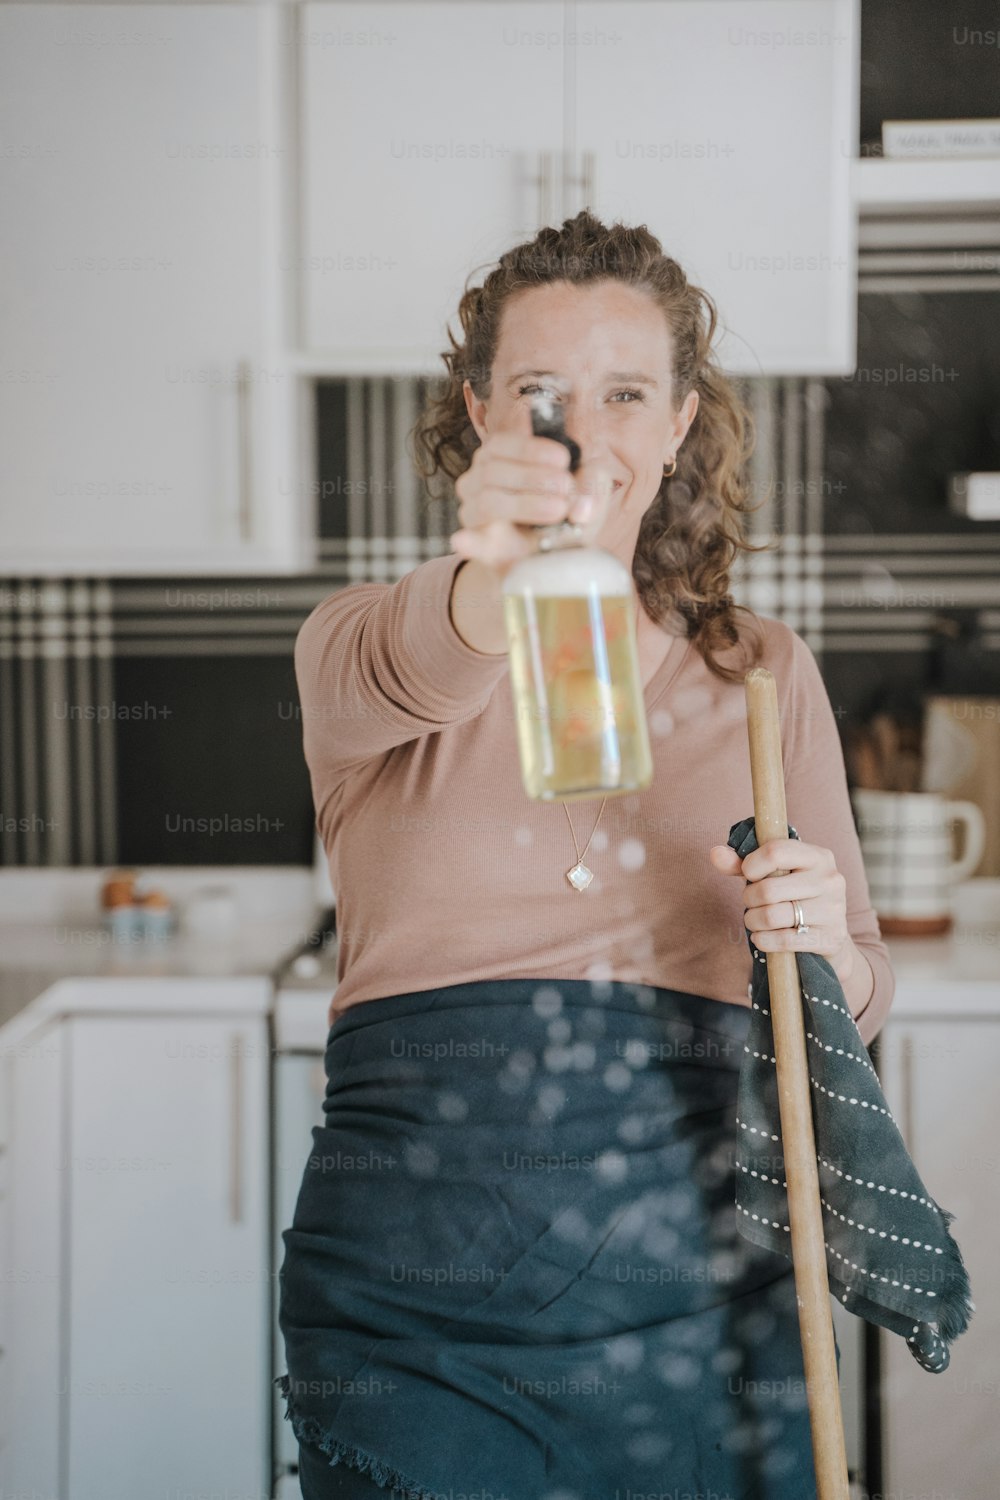 a woman in a kitchen with a broom and a mug